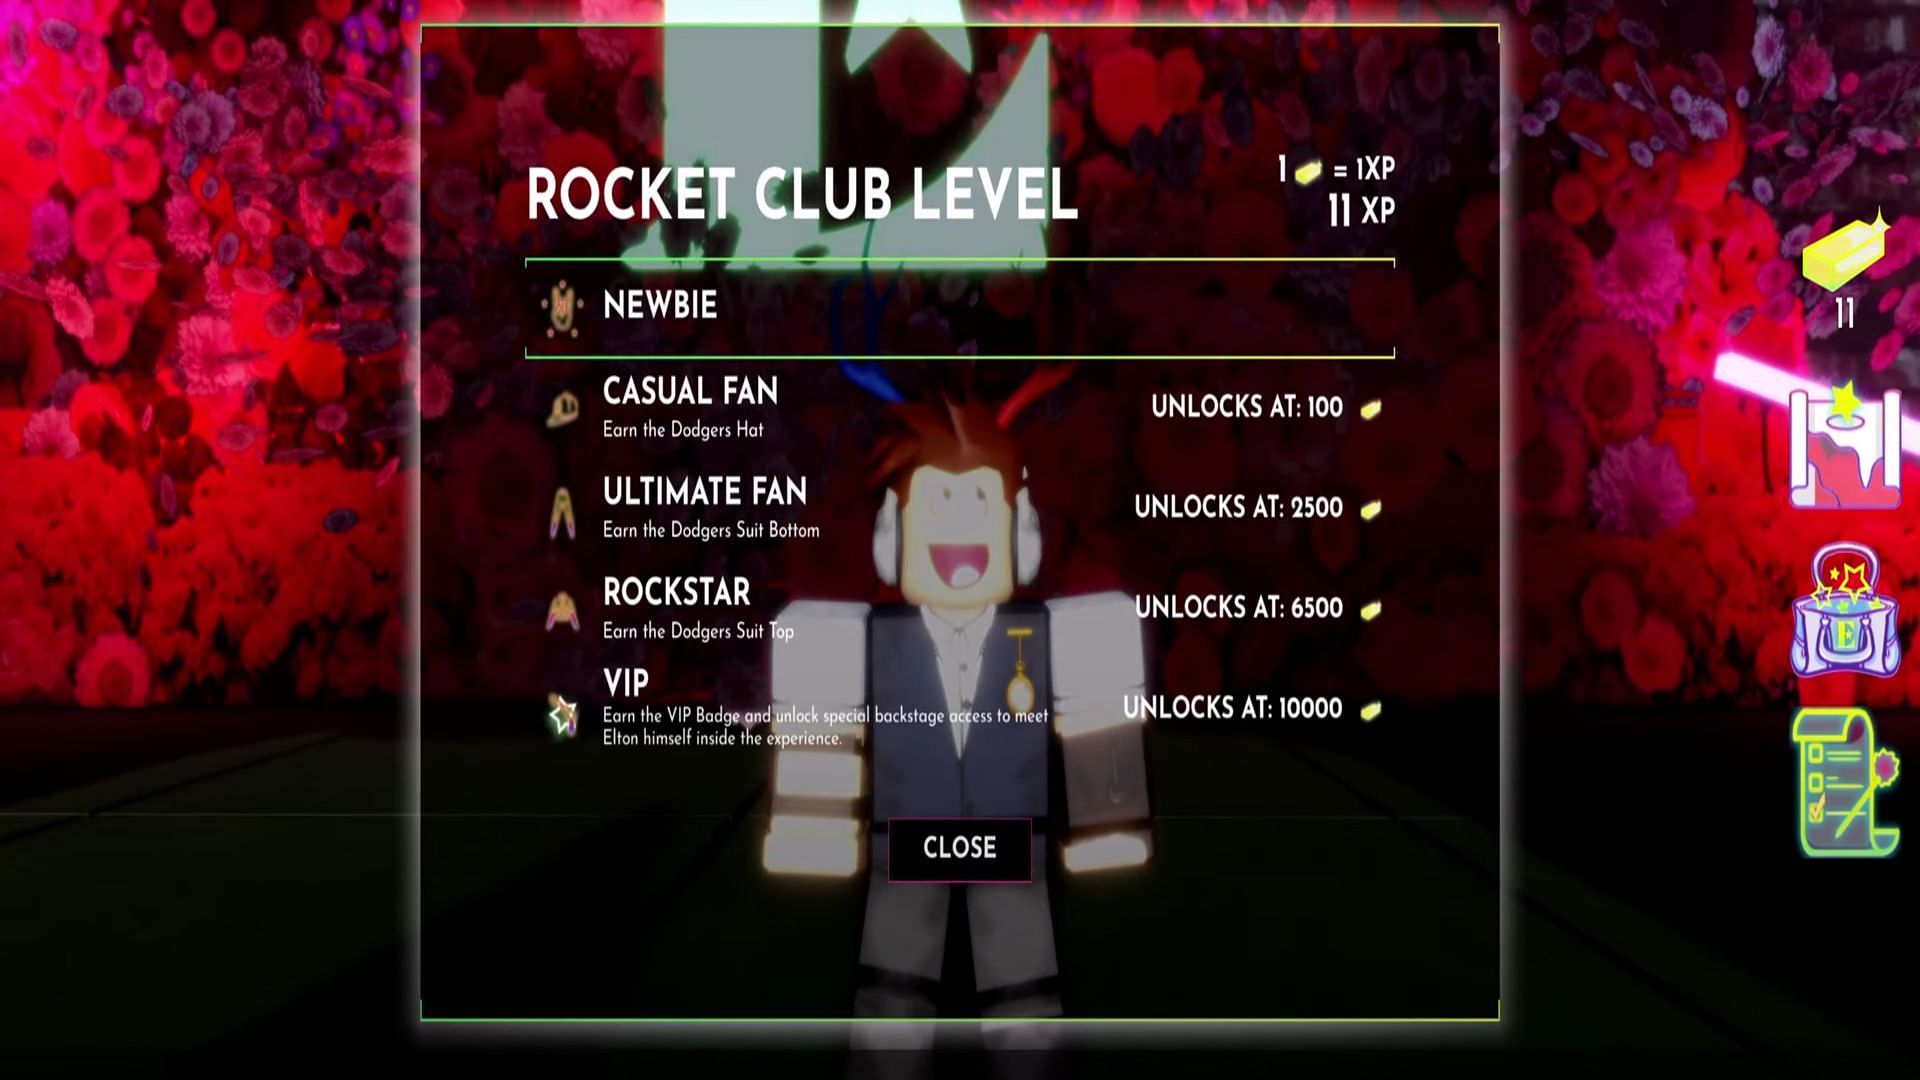 Rocket Club Level offers more details about the free items to the players (Image via Conor3D)